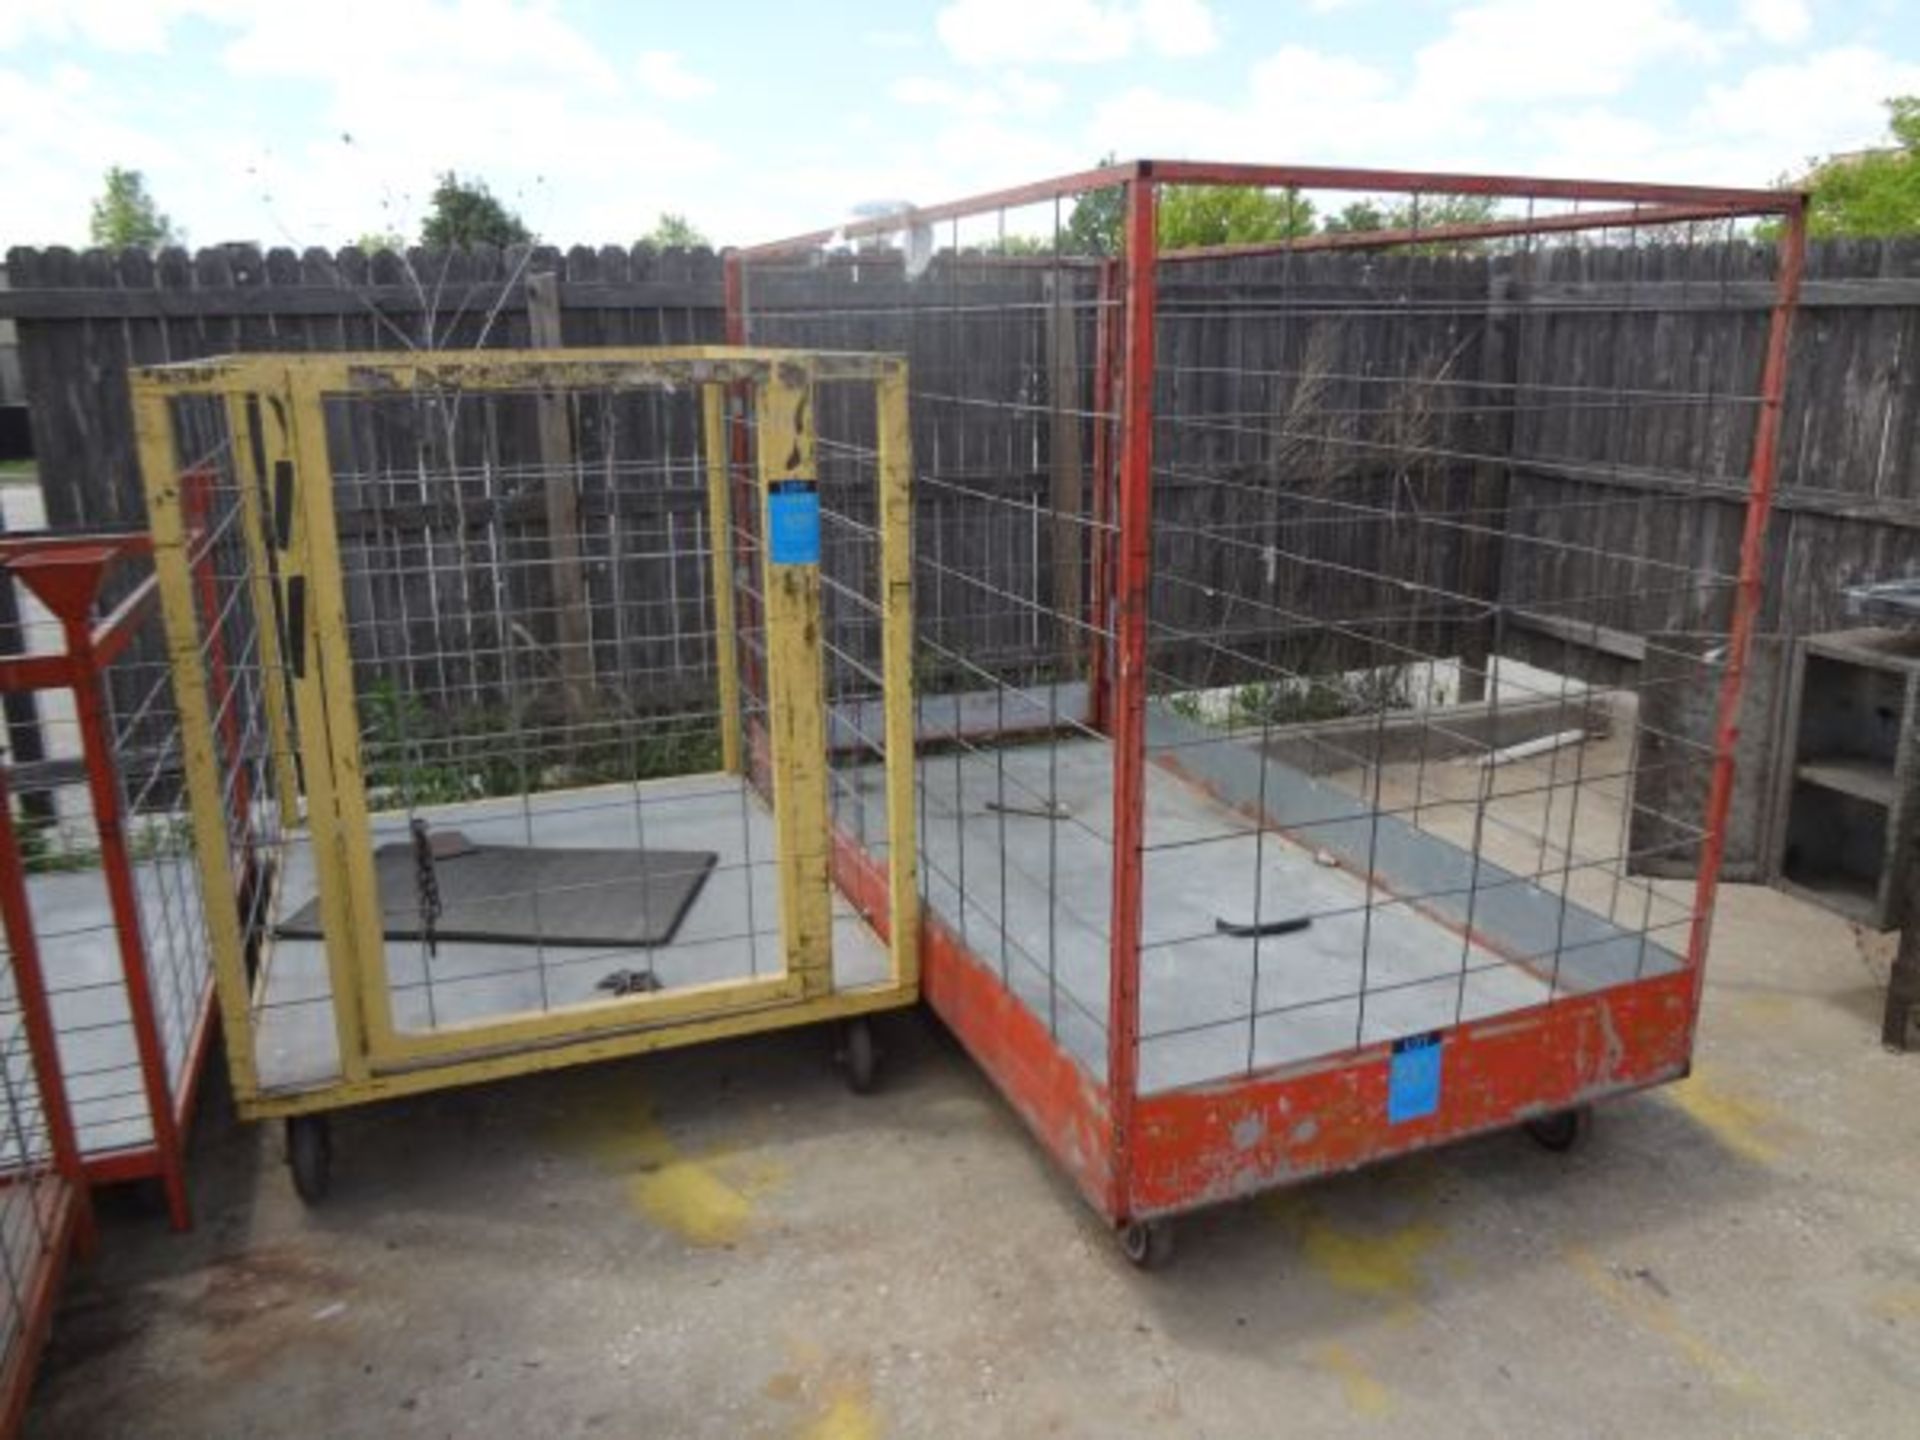 48" X 96" AND 53" X 63" Â PORTABLE STEEL CAGE TYPE CARTS